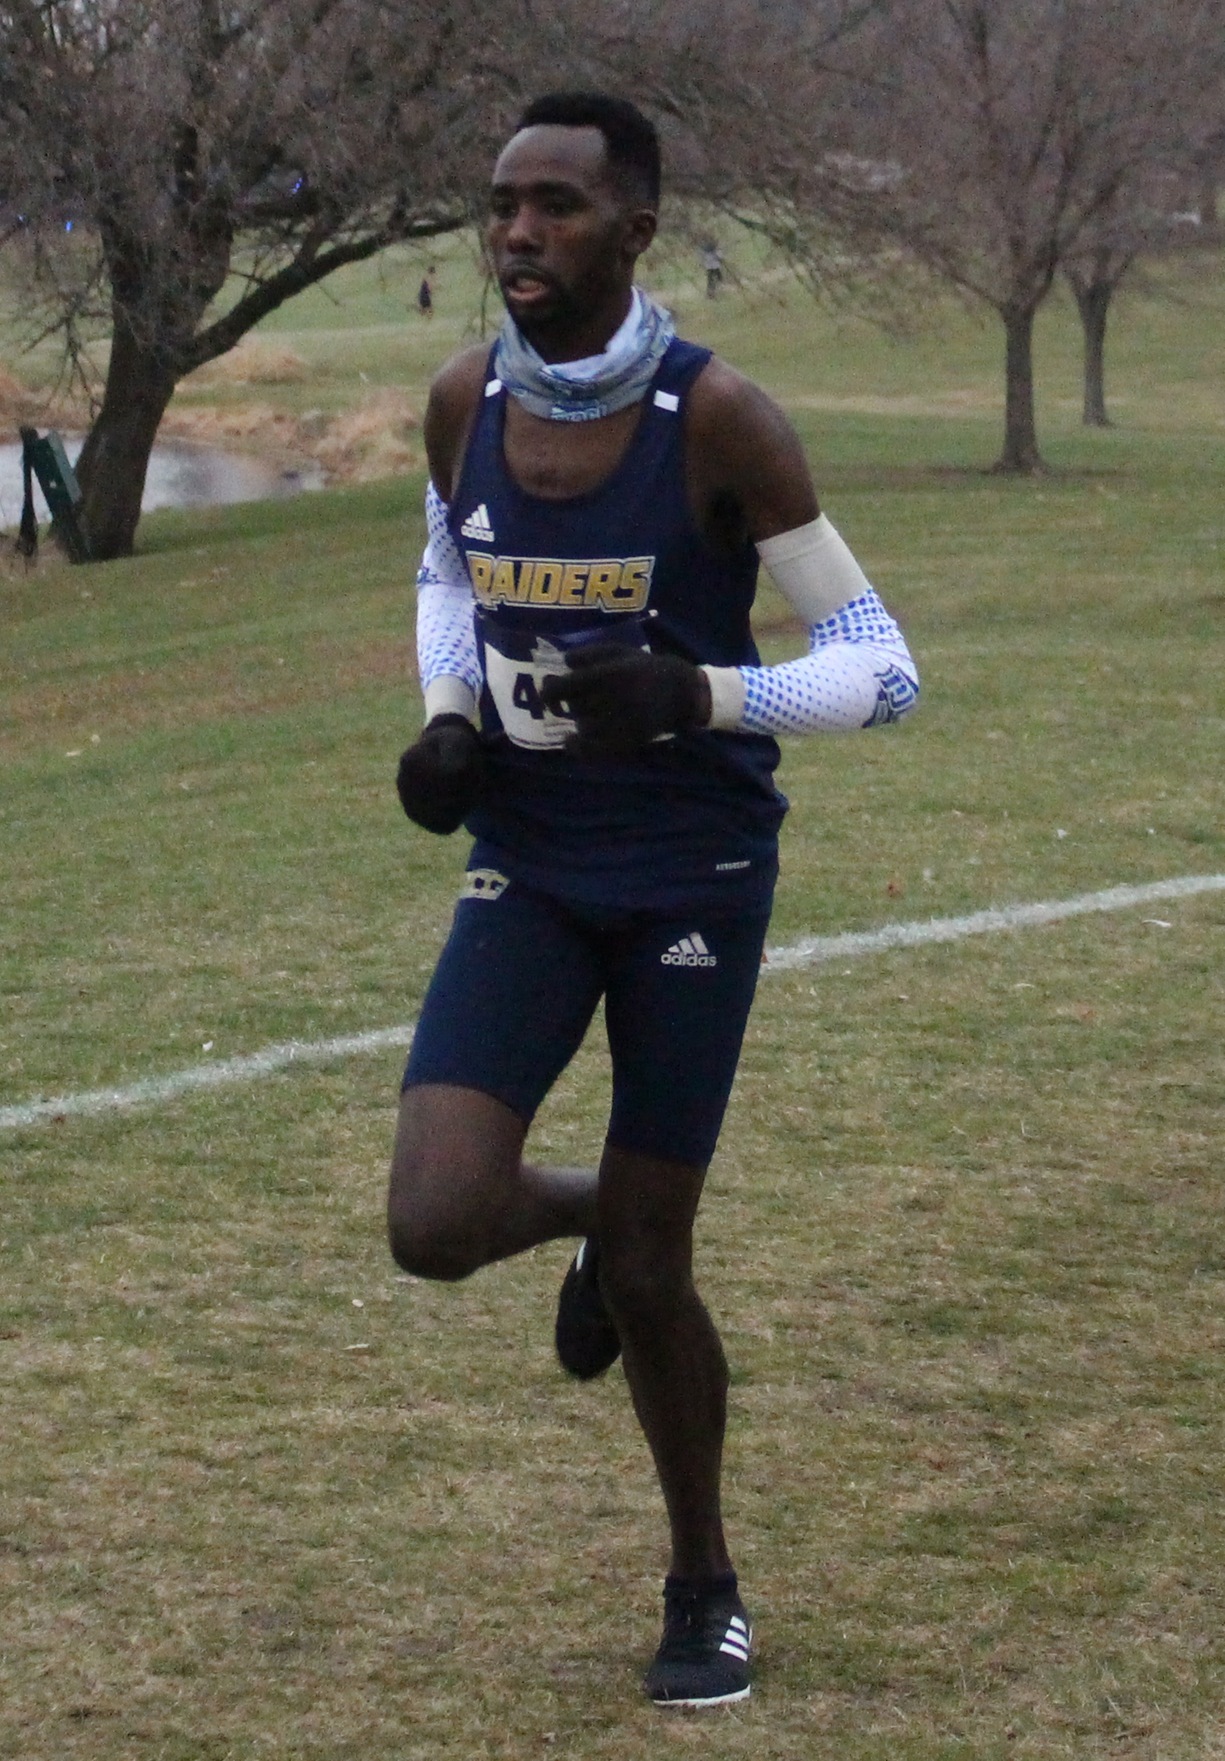 Grand Rapids Joshua Kipkoech cruises to a fifth place finish at the NJCAA Division II National Championship in Fort Dodge, IA.